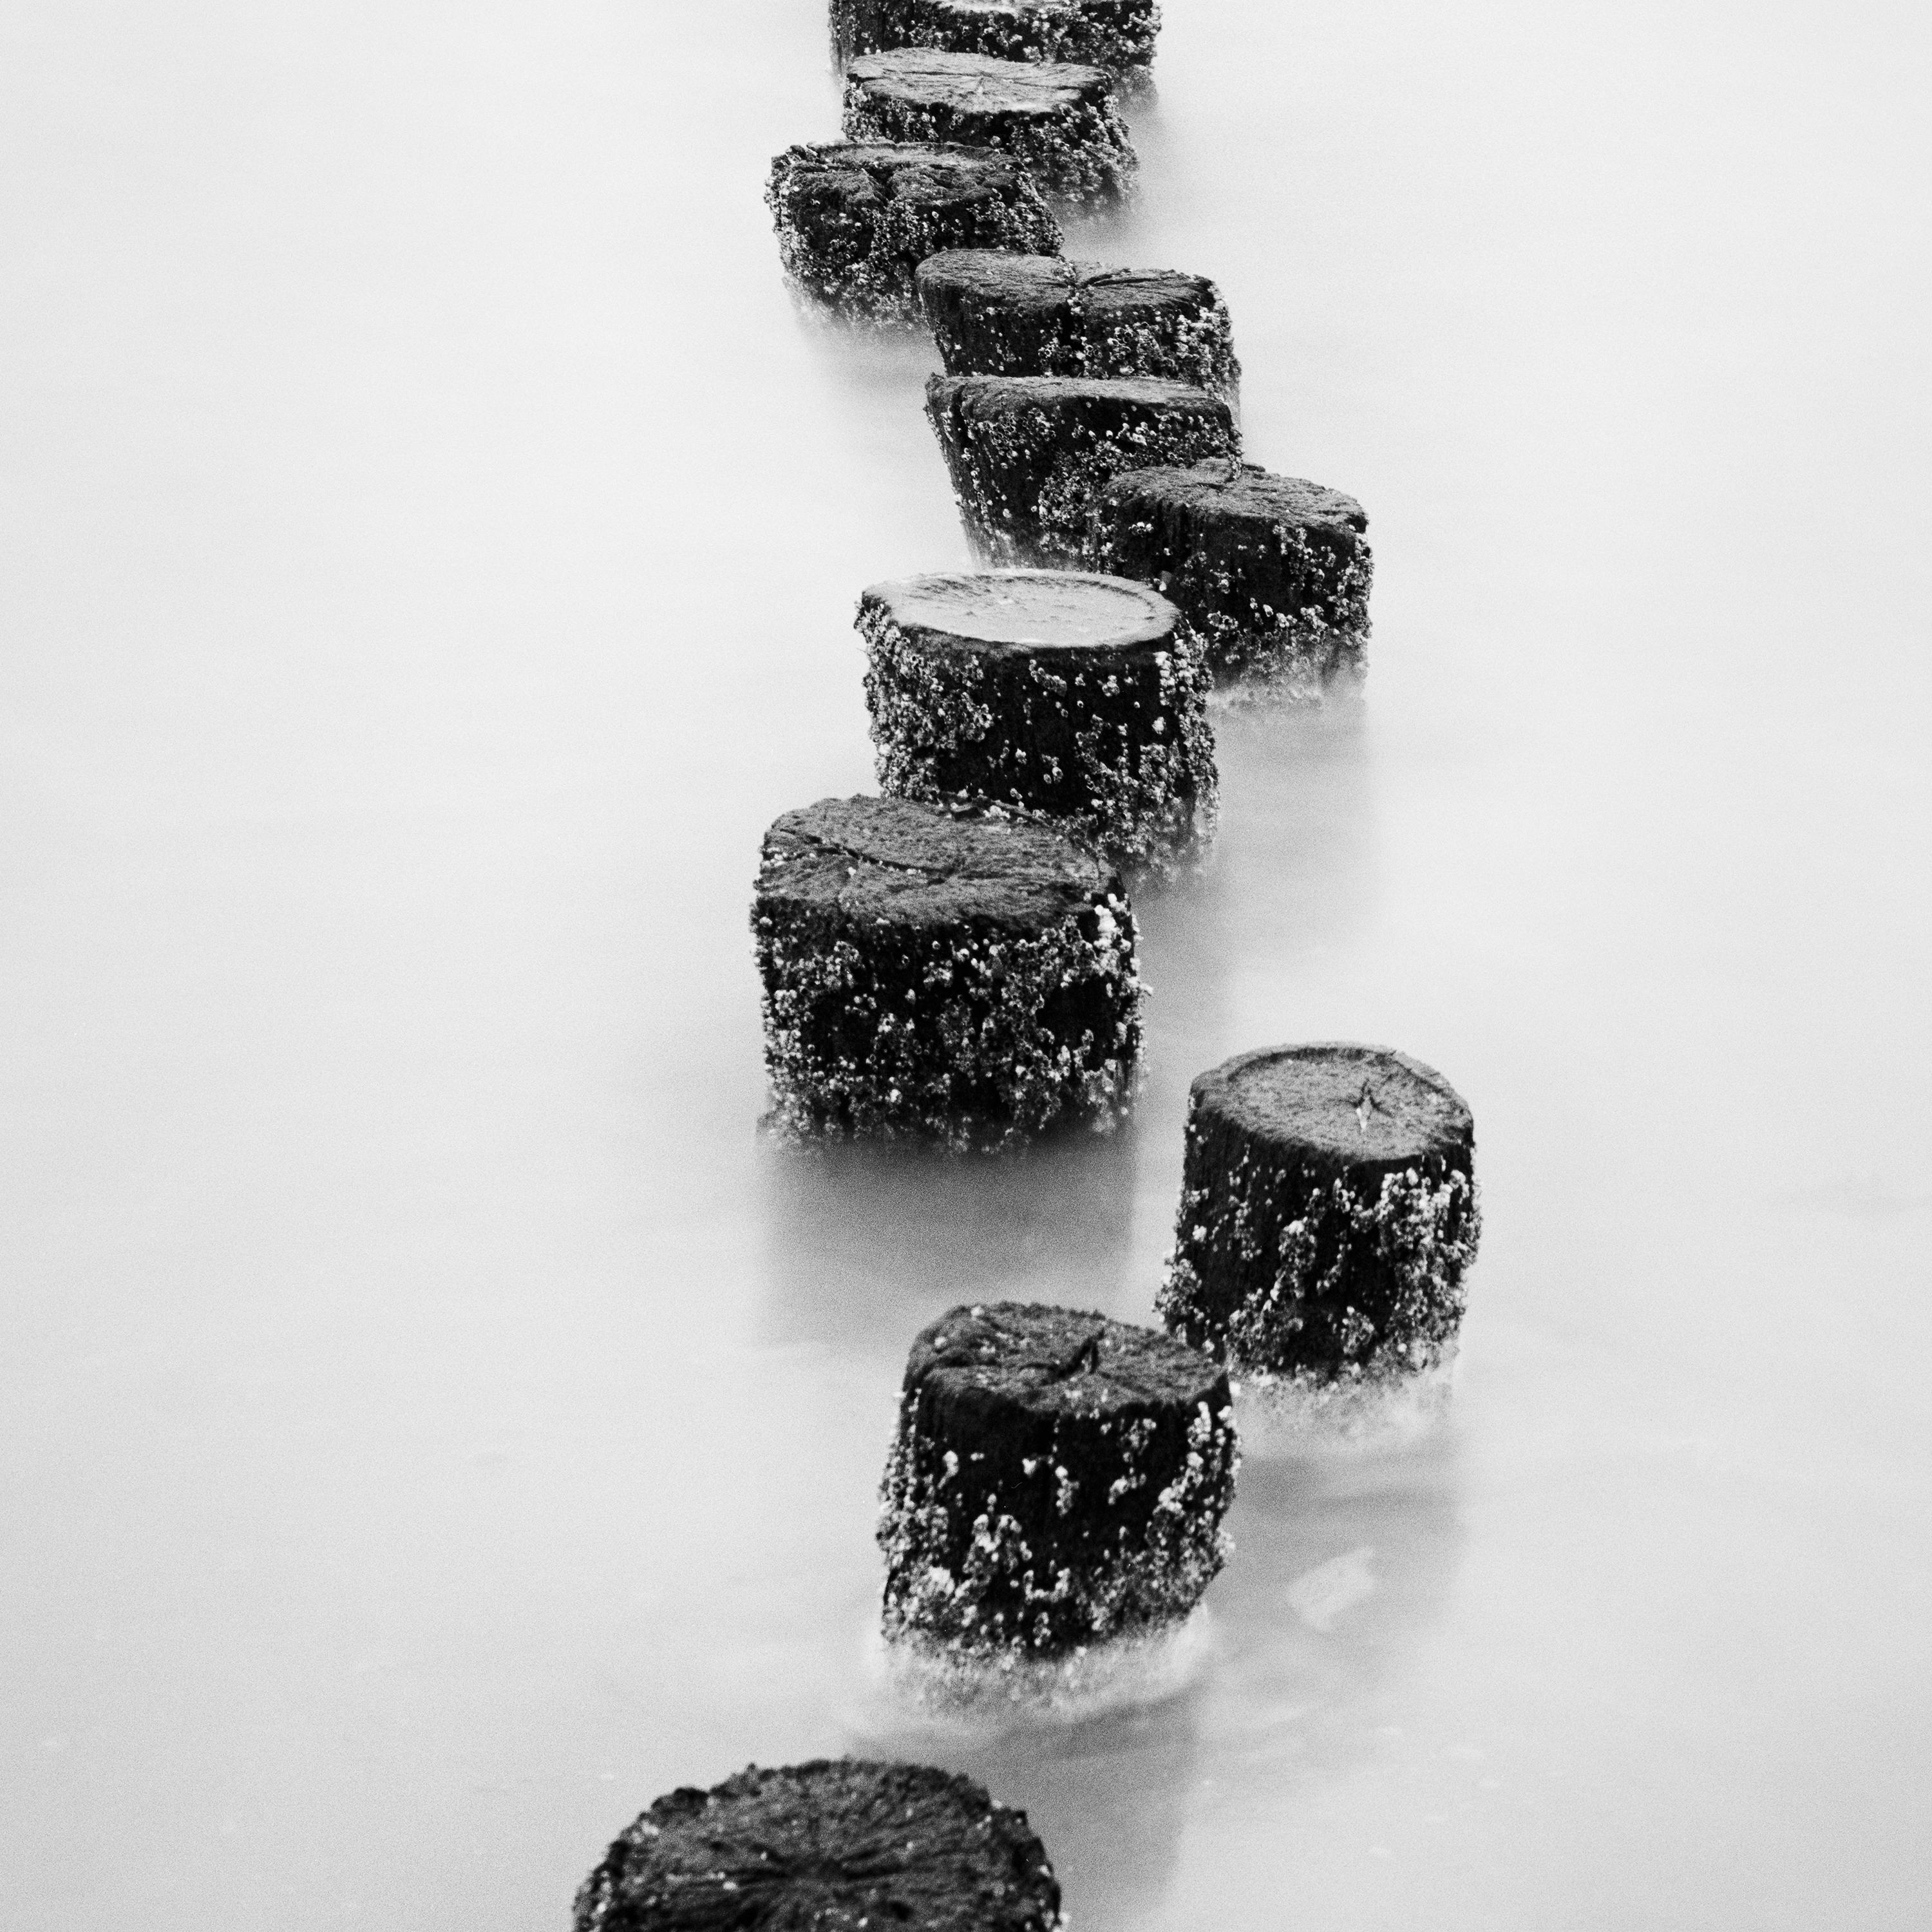 Wooden Pegs, long exposure, black and white, fine art, waterscape, photography For Sale 3